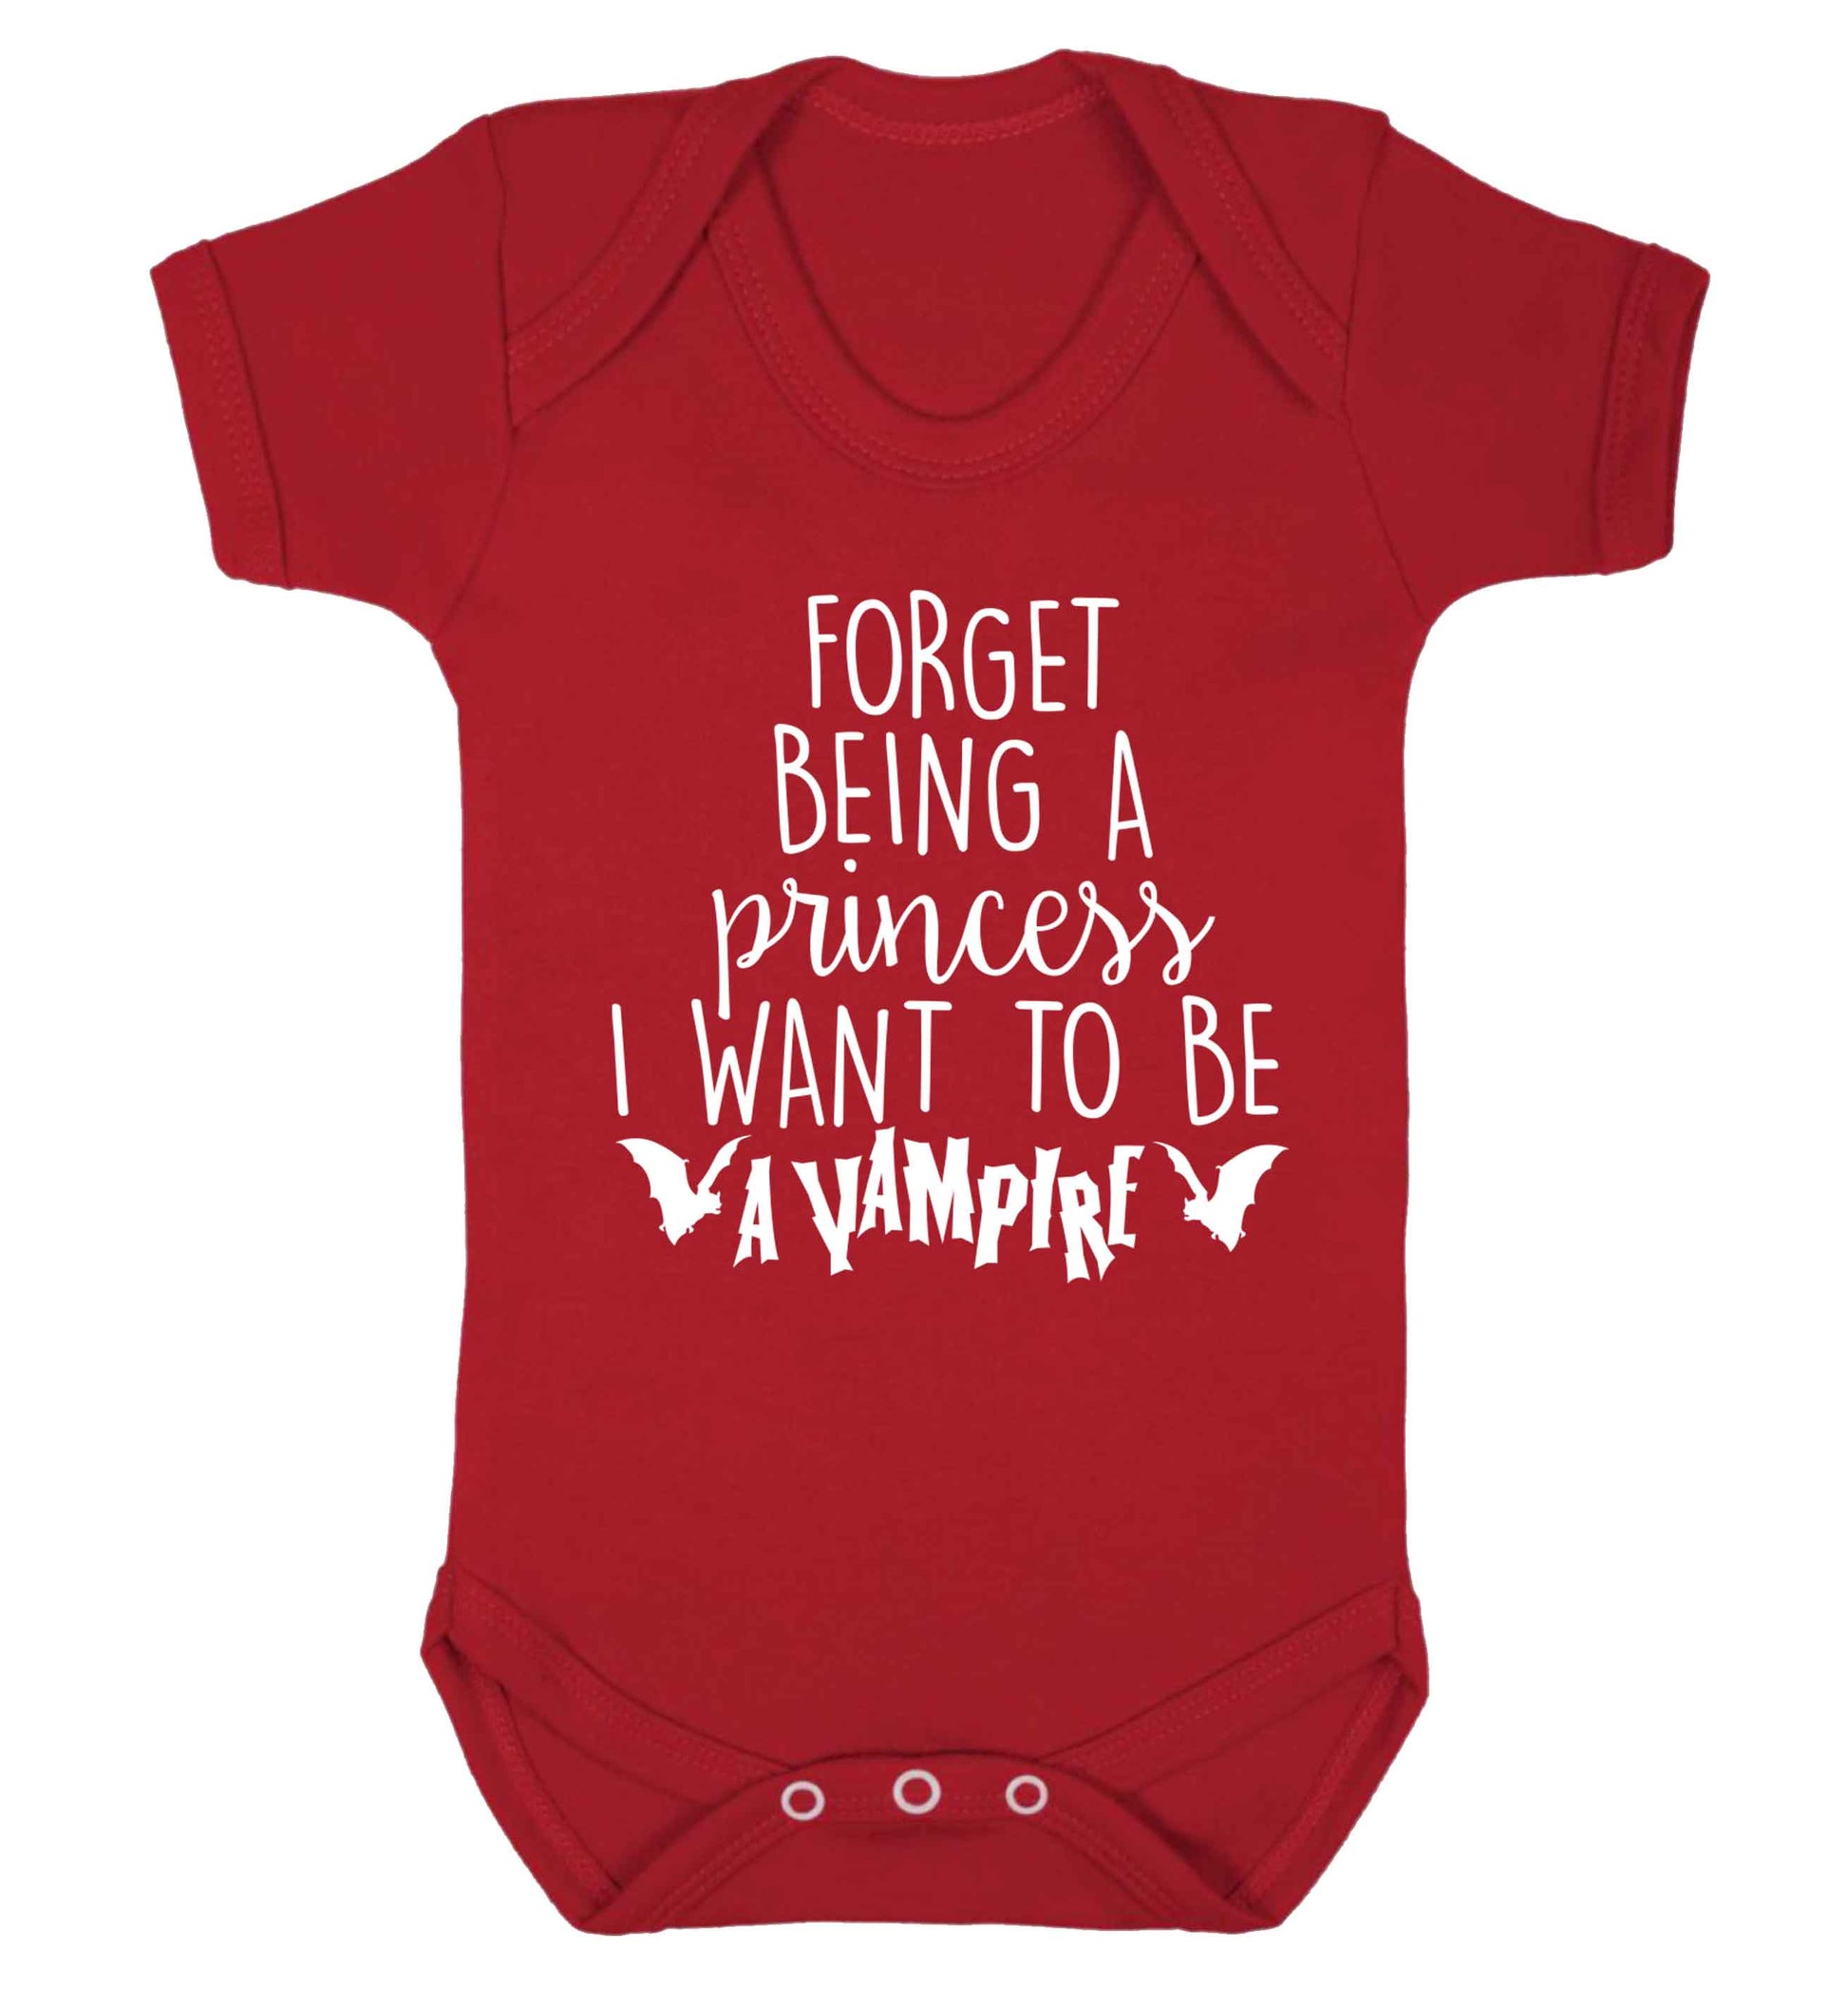 Forget being a princess I want to be a vampire Baby Vest red 18-24 months